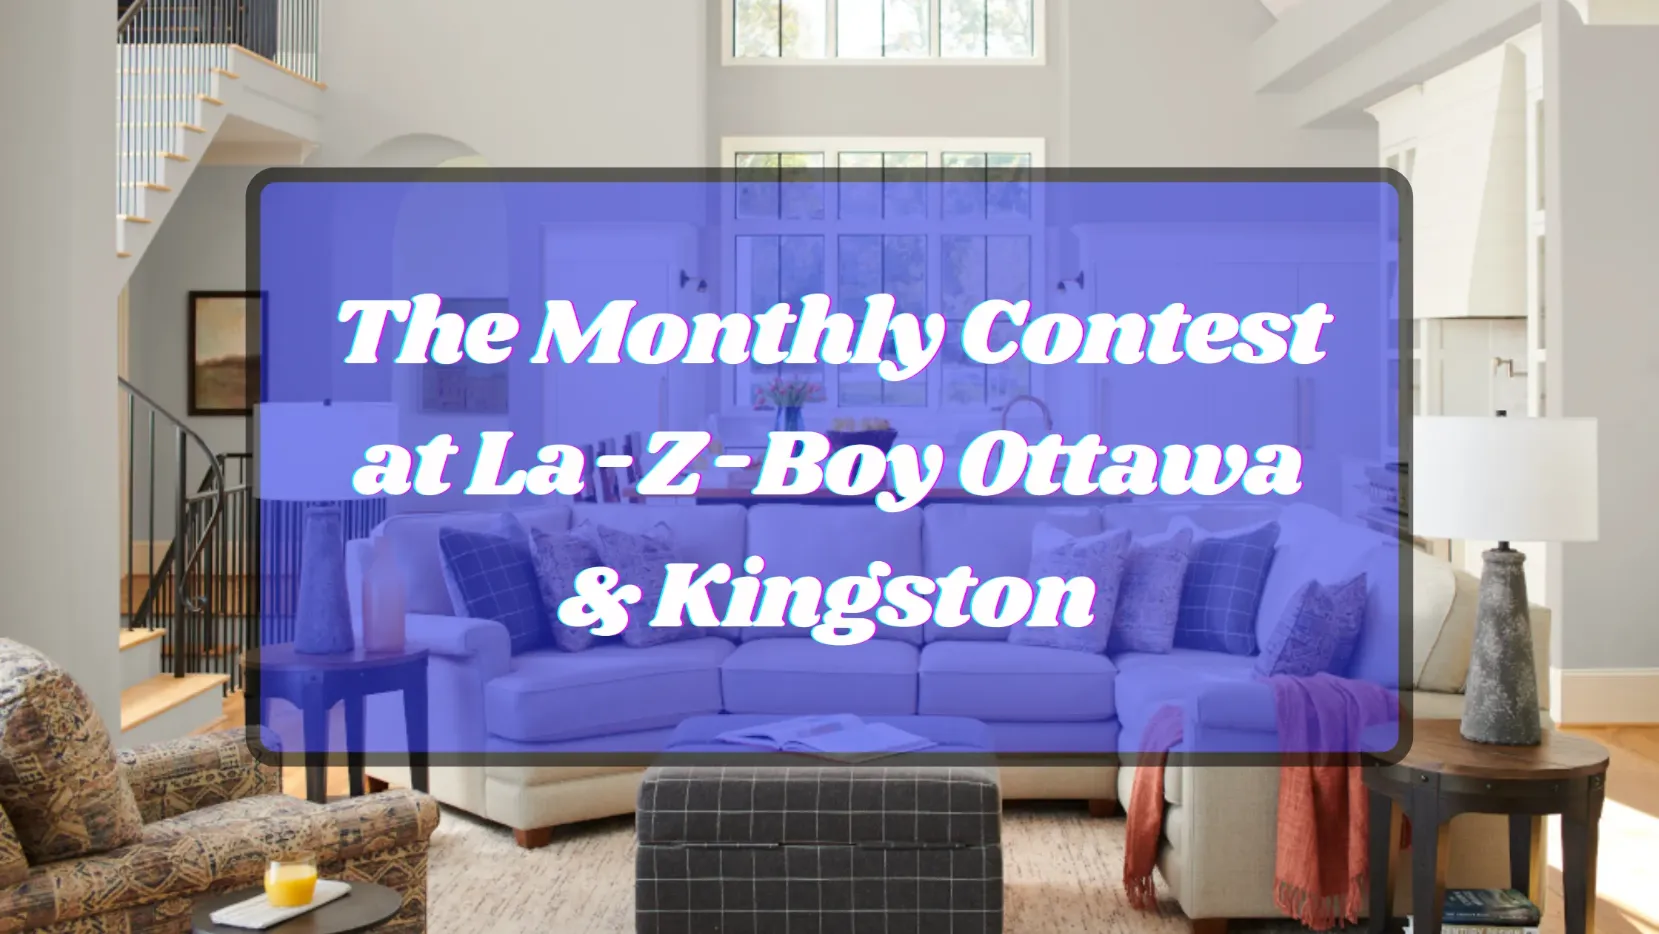 The Monthly Contest at La-Z-Boy Ottawa and Kingston